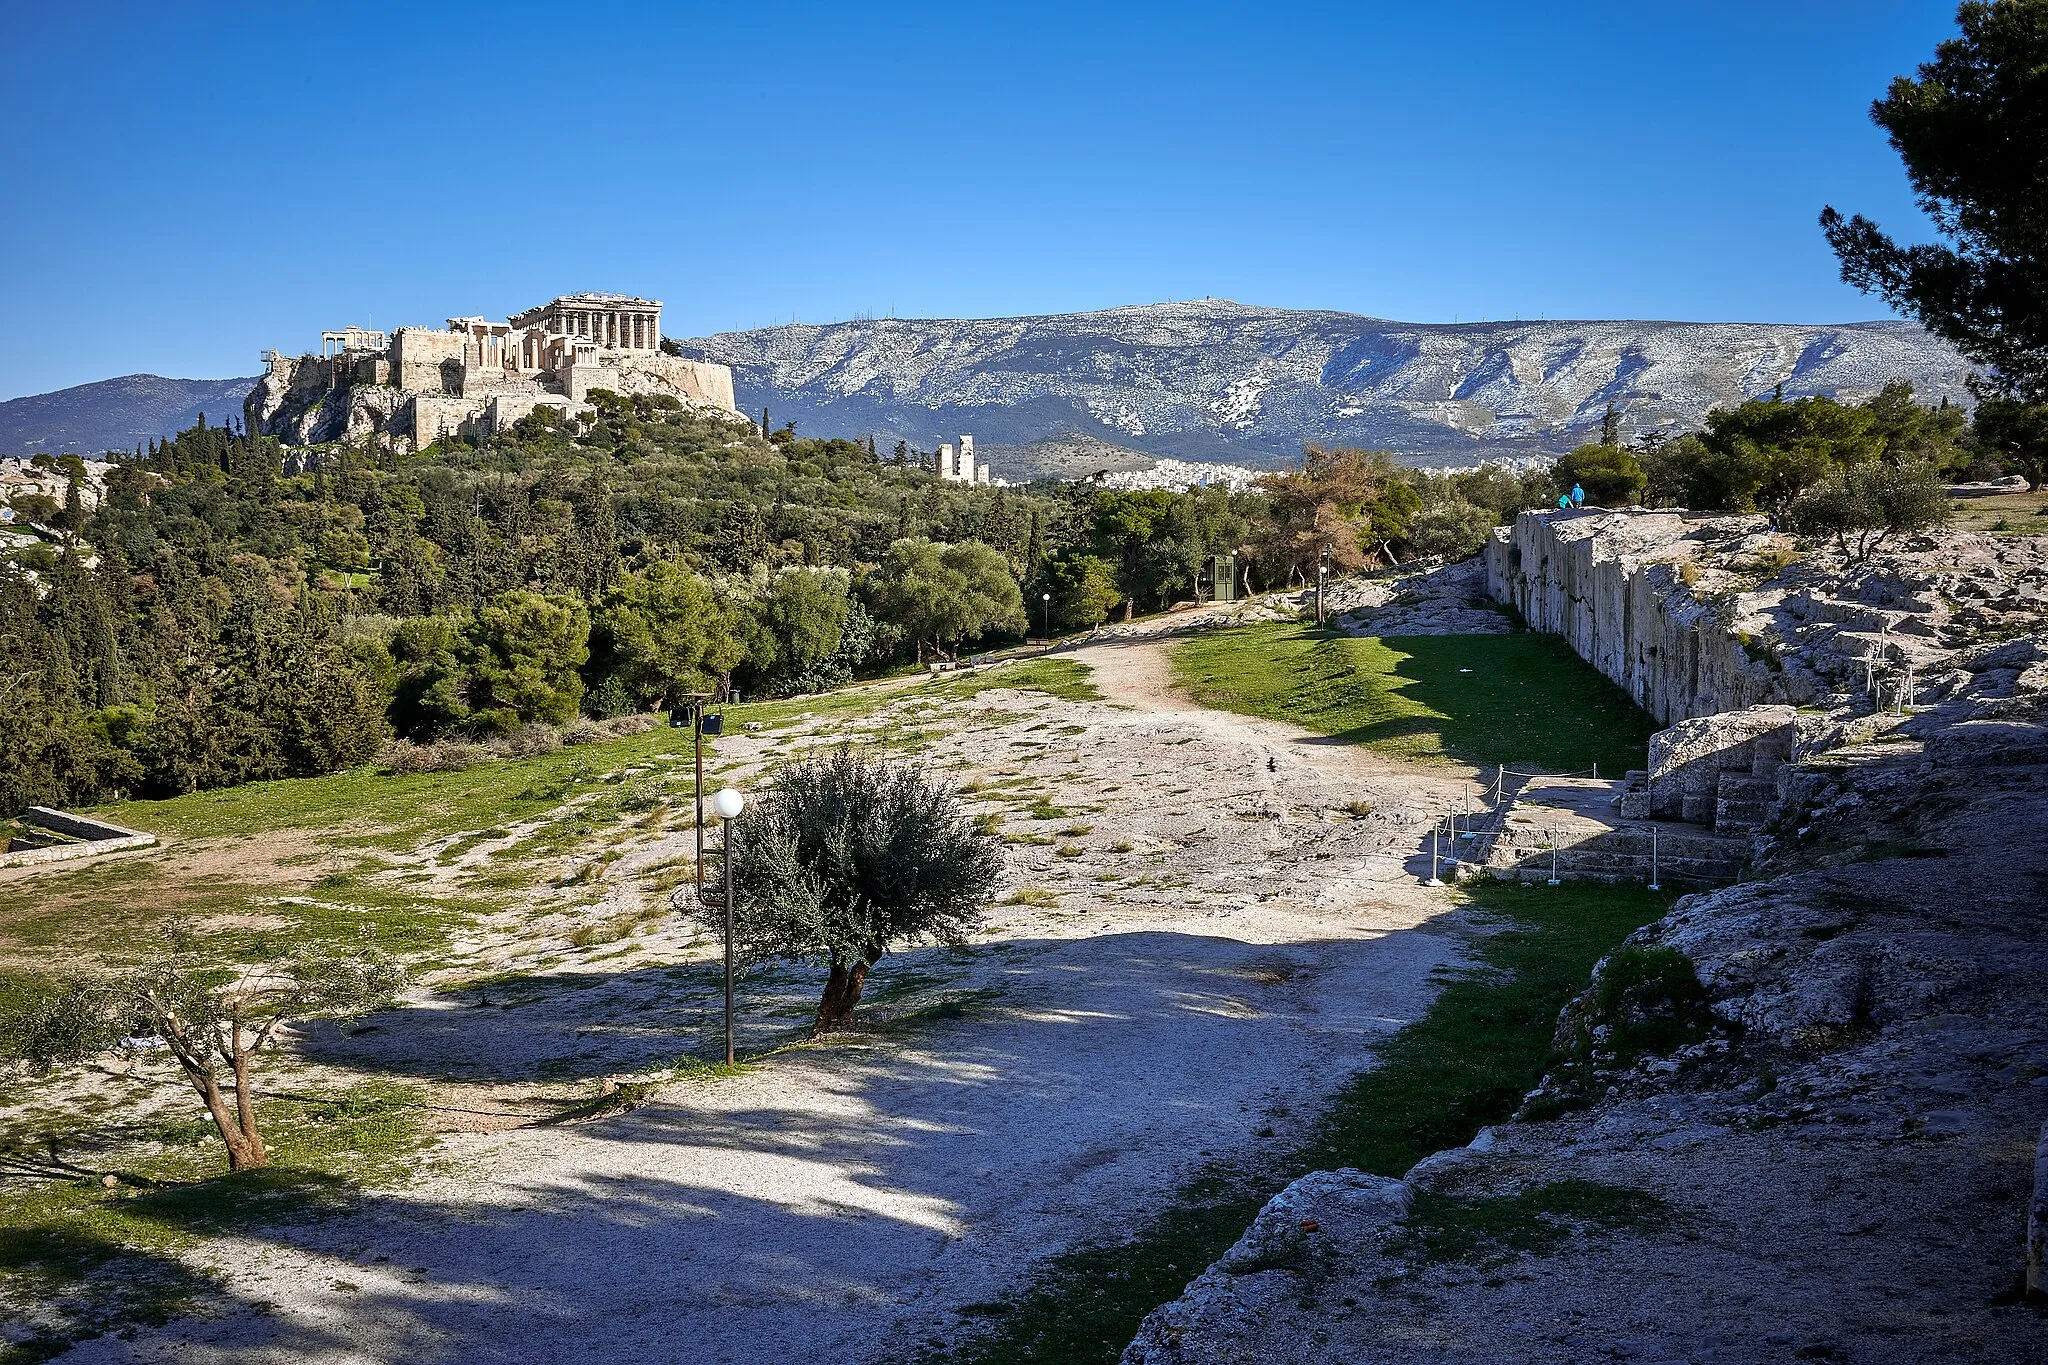 Photo showing: The Pnyx plateau was the location of the People's Assembly in Ancient Athens (6th - 4th cent. B.C.).